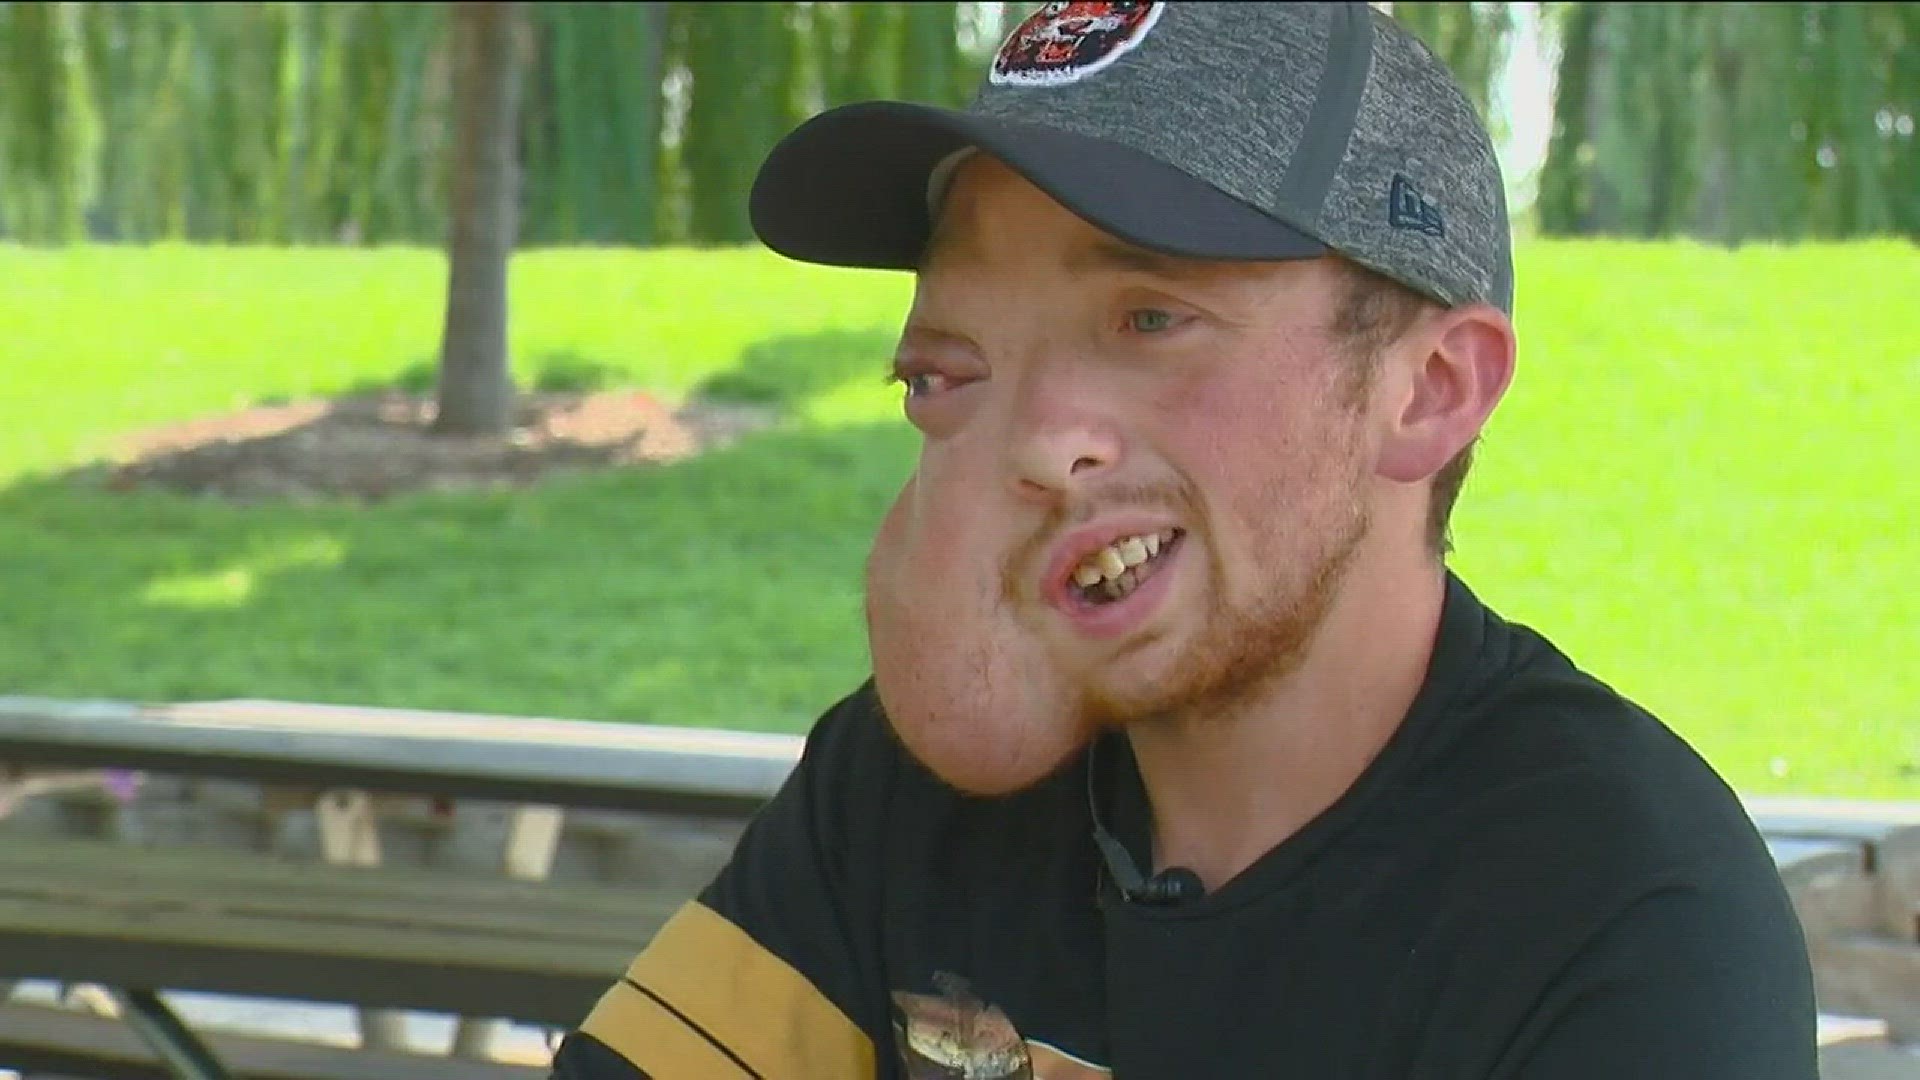 Lucas McCulley has been living with a tumor growing on his face.